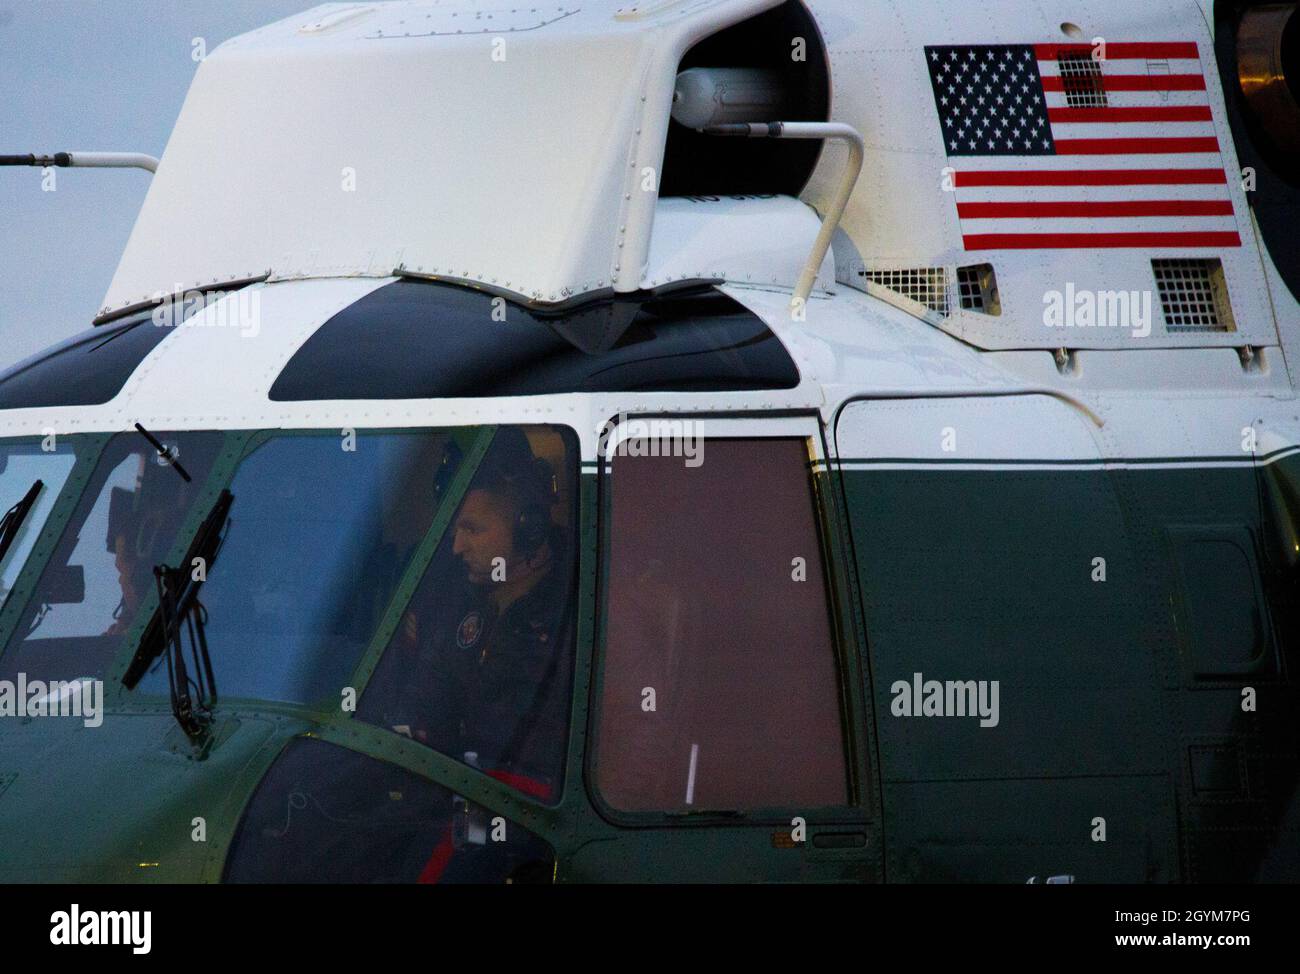 Marine One taxis onto the FAA William J. Hughes Technical Center ramp Jan. 28, 2020, at the Atlantic City International Airport in Egg Harbor Township, N.J. Marine One arrived at the airport prior to the arrival of President Donald J. Trump in Air Force One. (U.S. Air National Guard photo by Airman Hunter Hires) Stock Photo